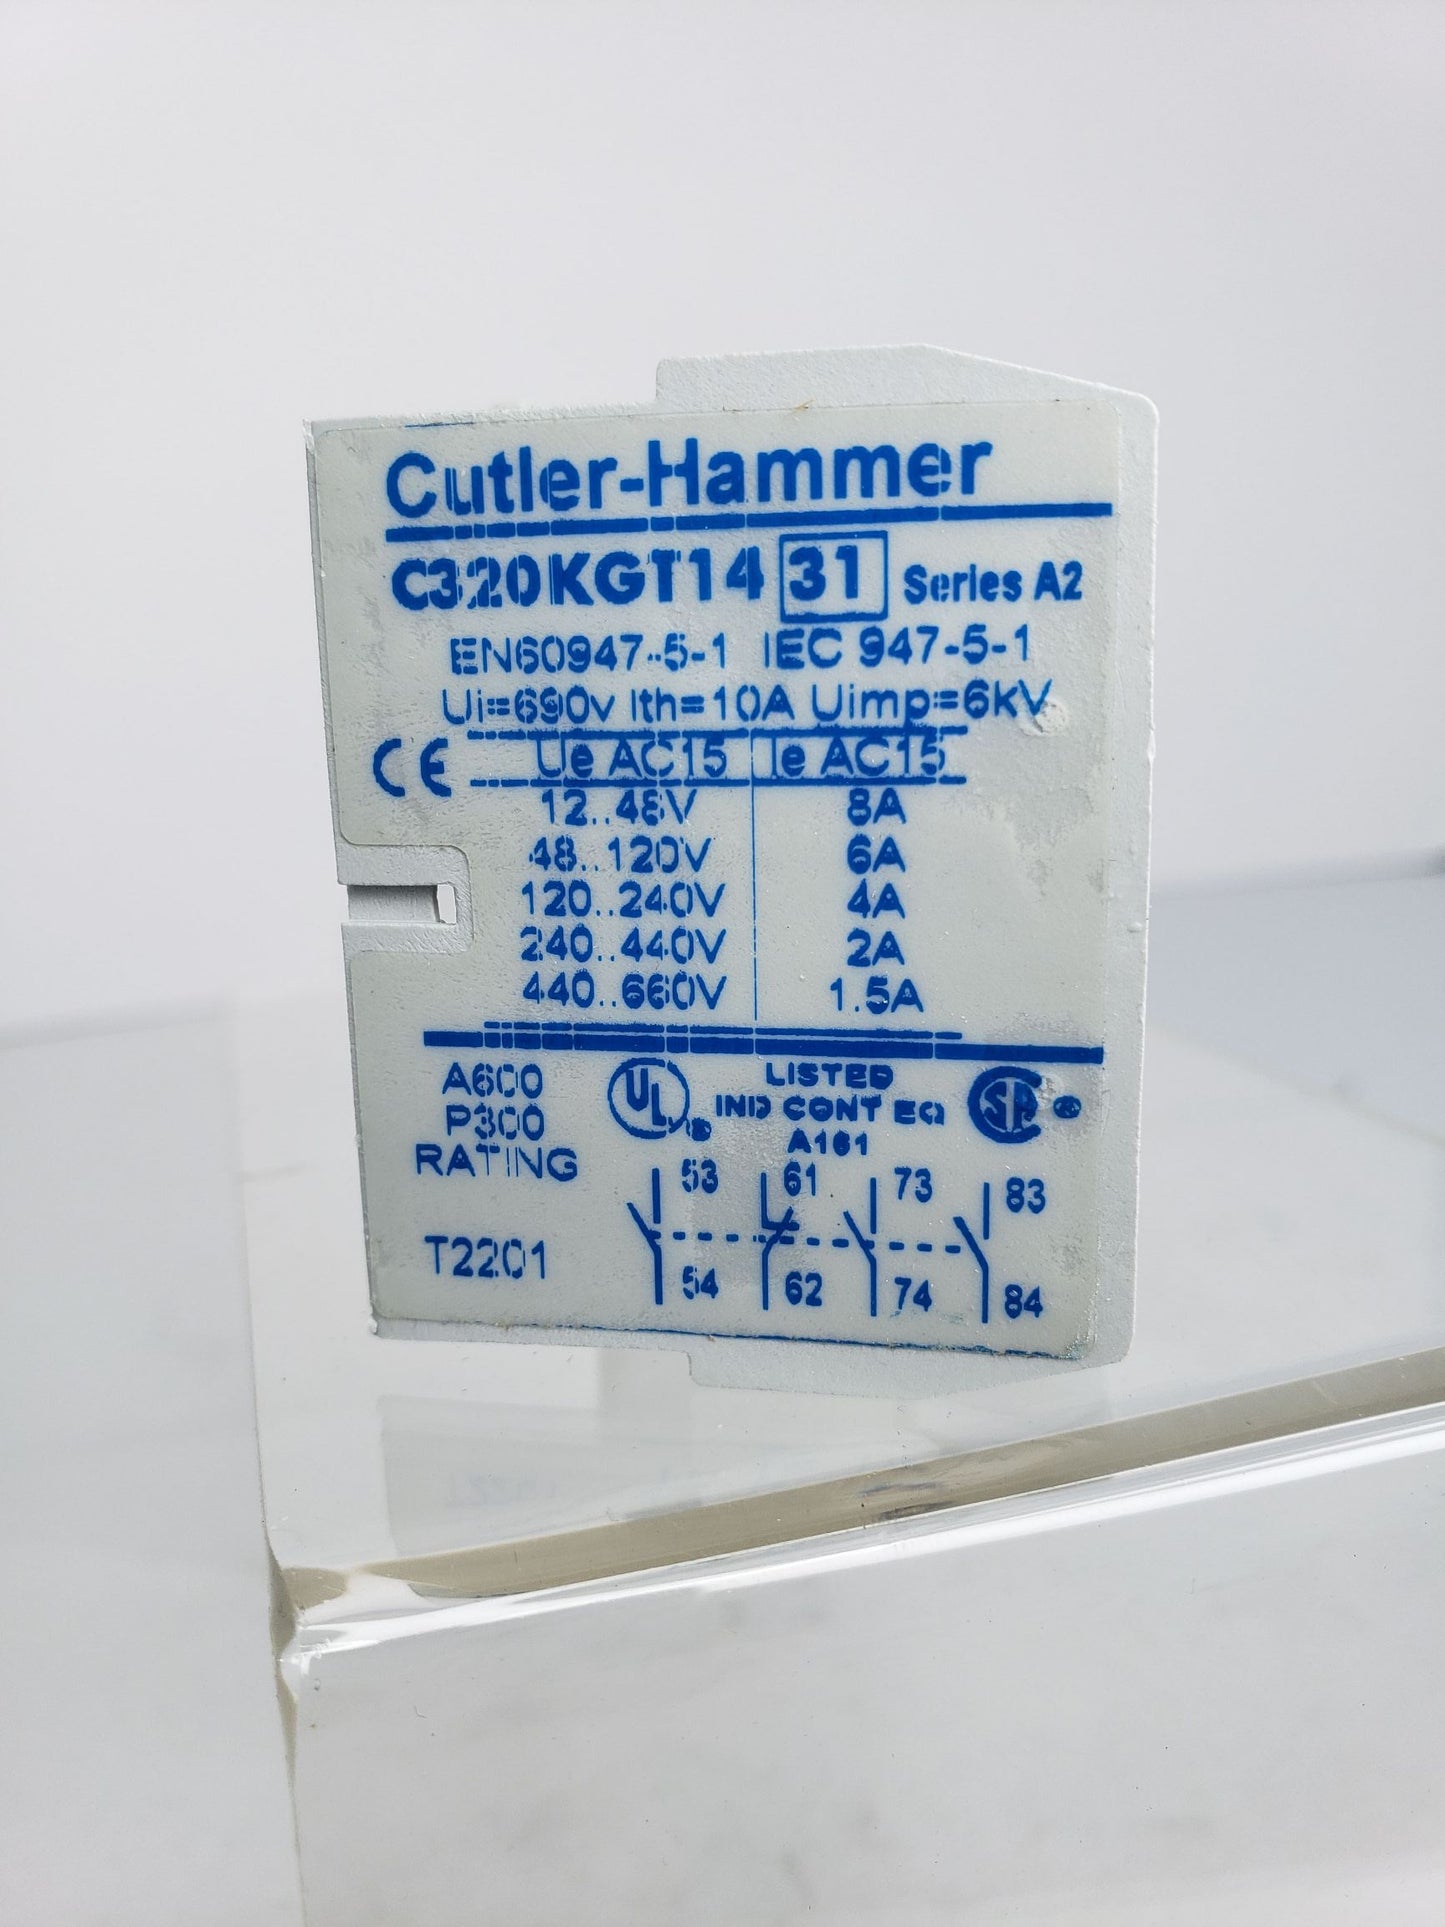 CUTLER HAMMER C320KGT14 AUXILIARY CONTACT SERIES A2 1 PCS New Condition